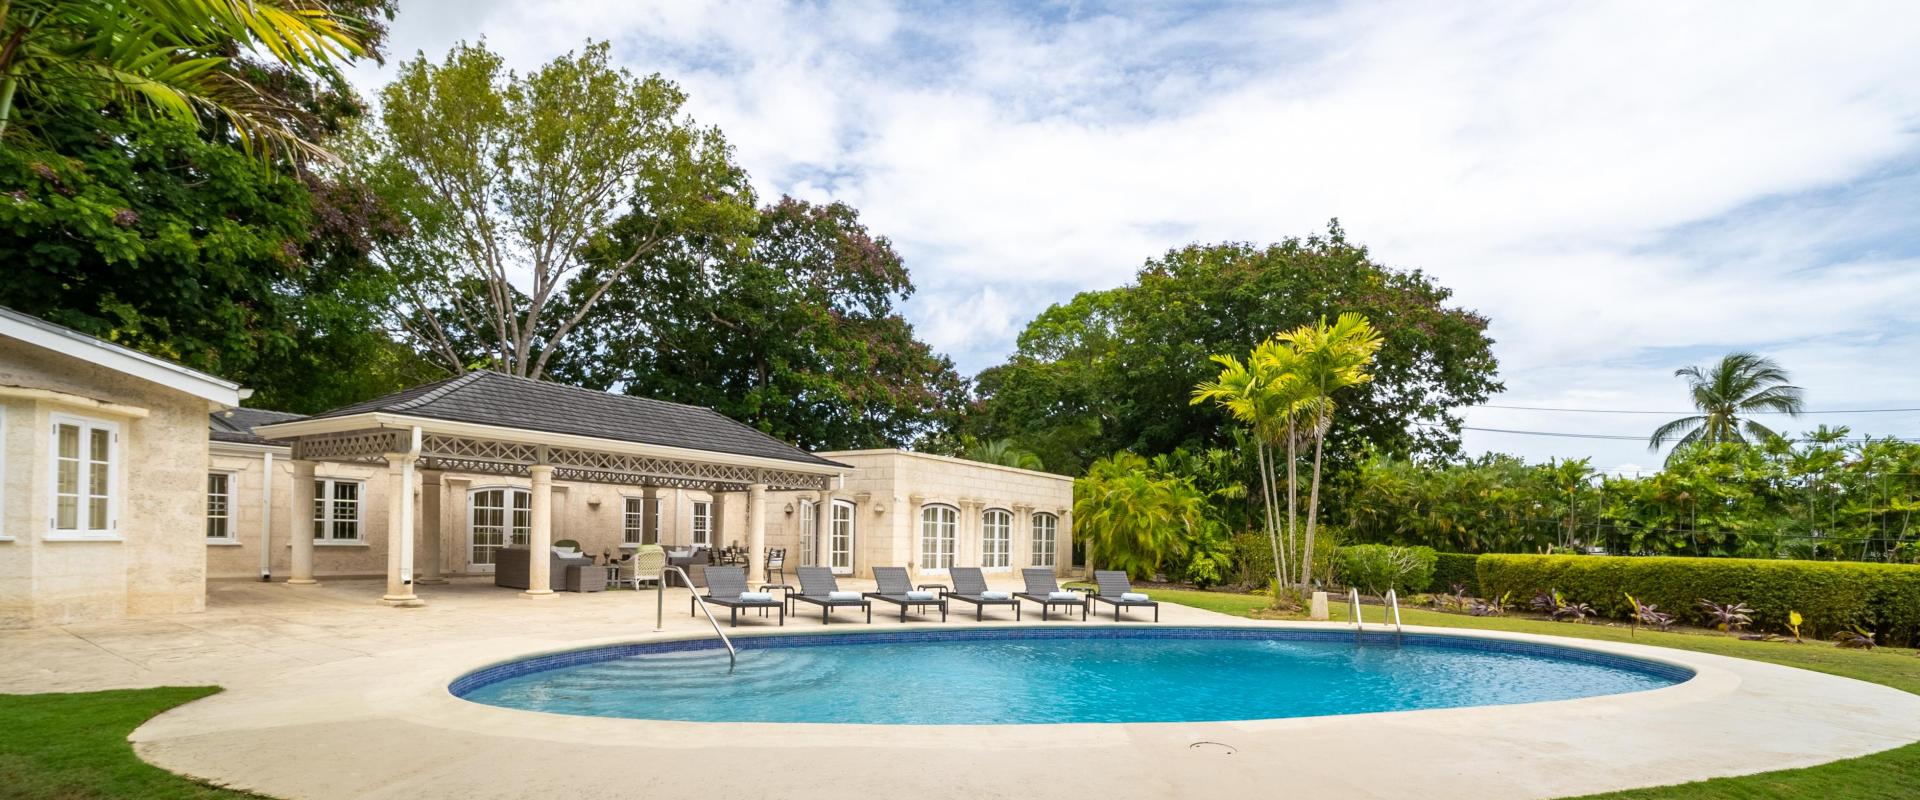 Franklins House Holiday Rental Villa In Sandy Lane Barbados Pool Deck and Gardens towards house